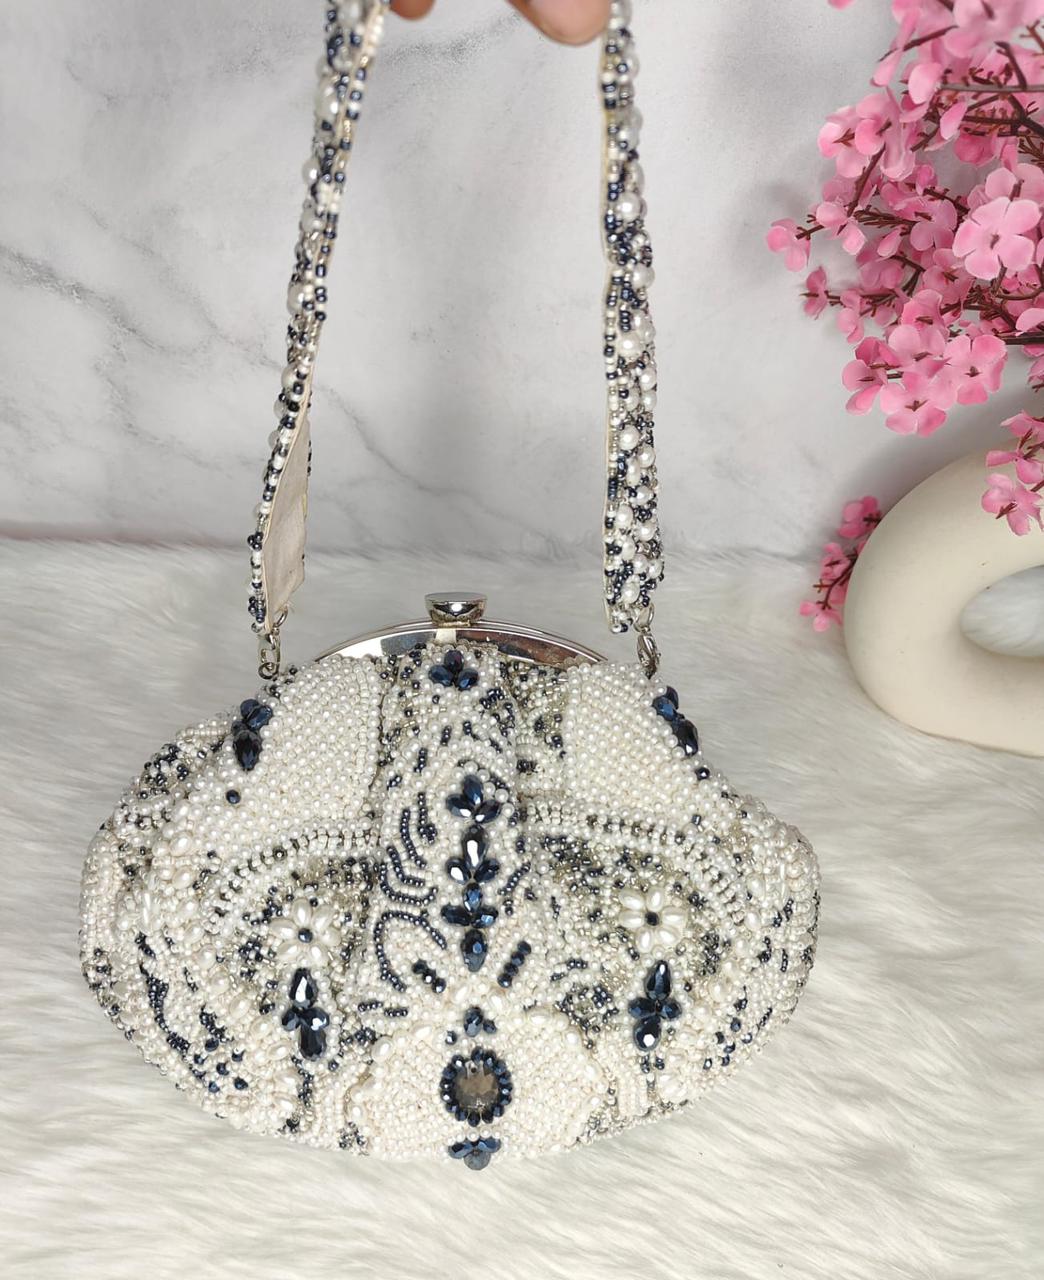 White Designer Purse with Pearls for Brides